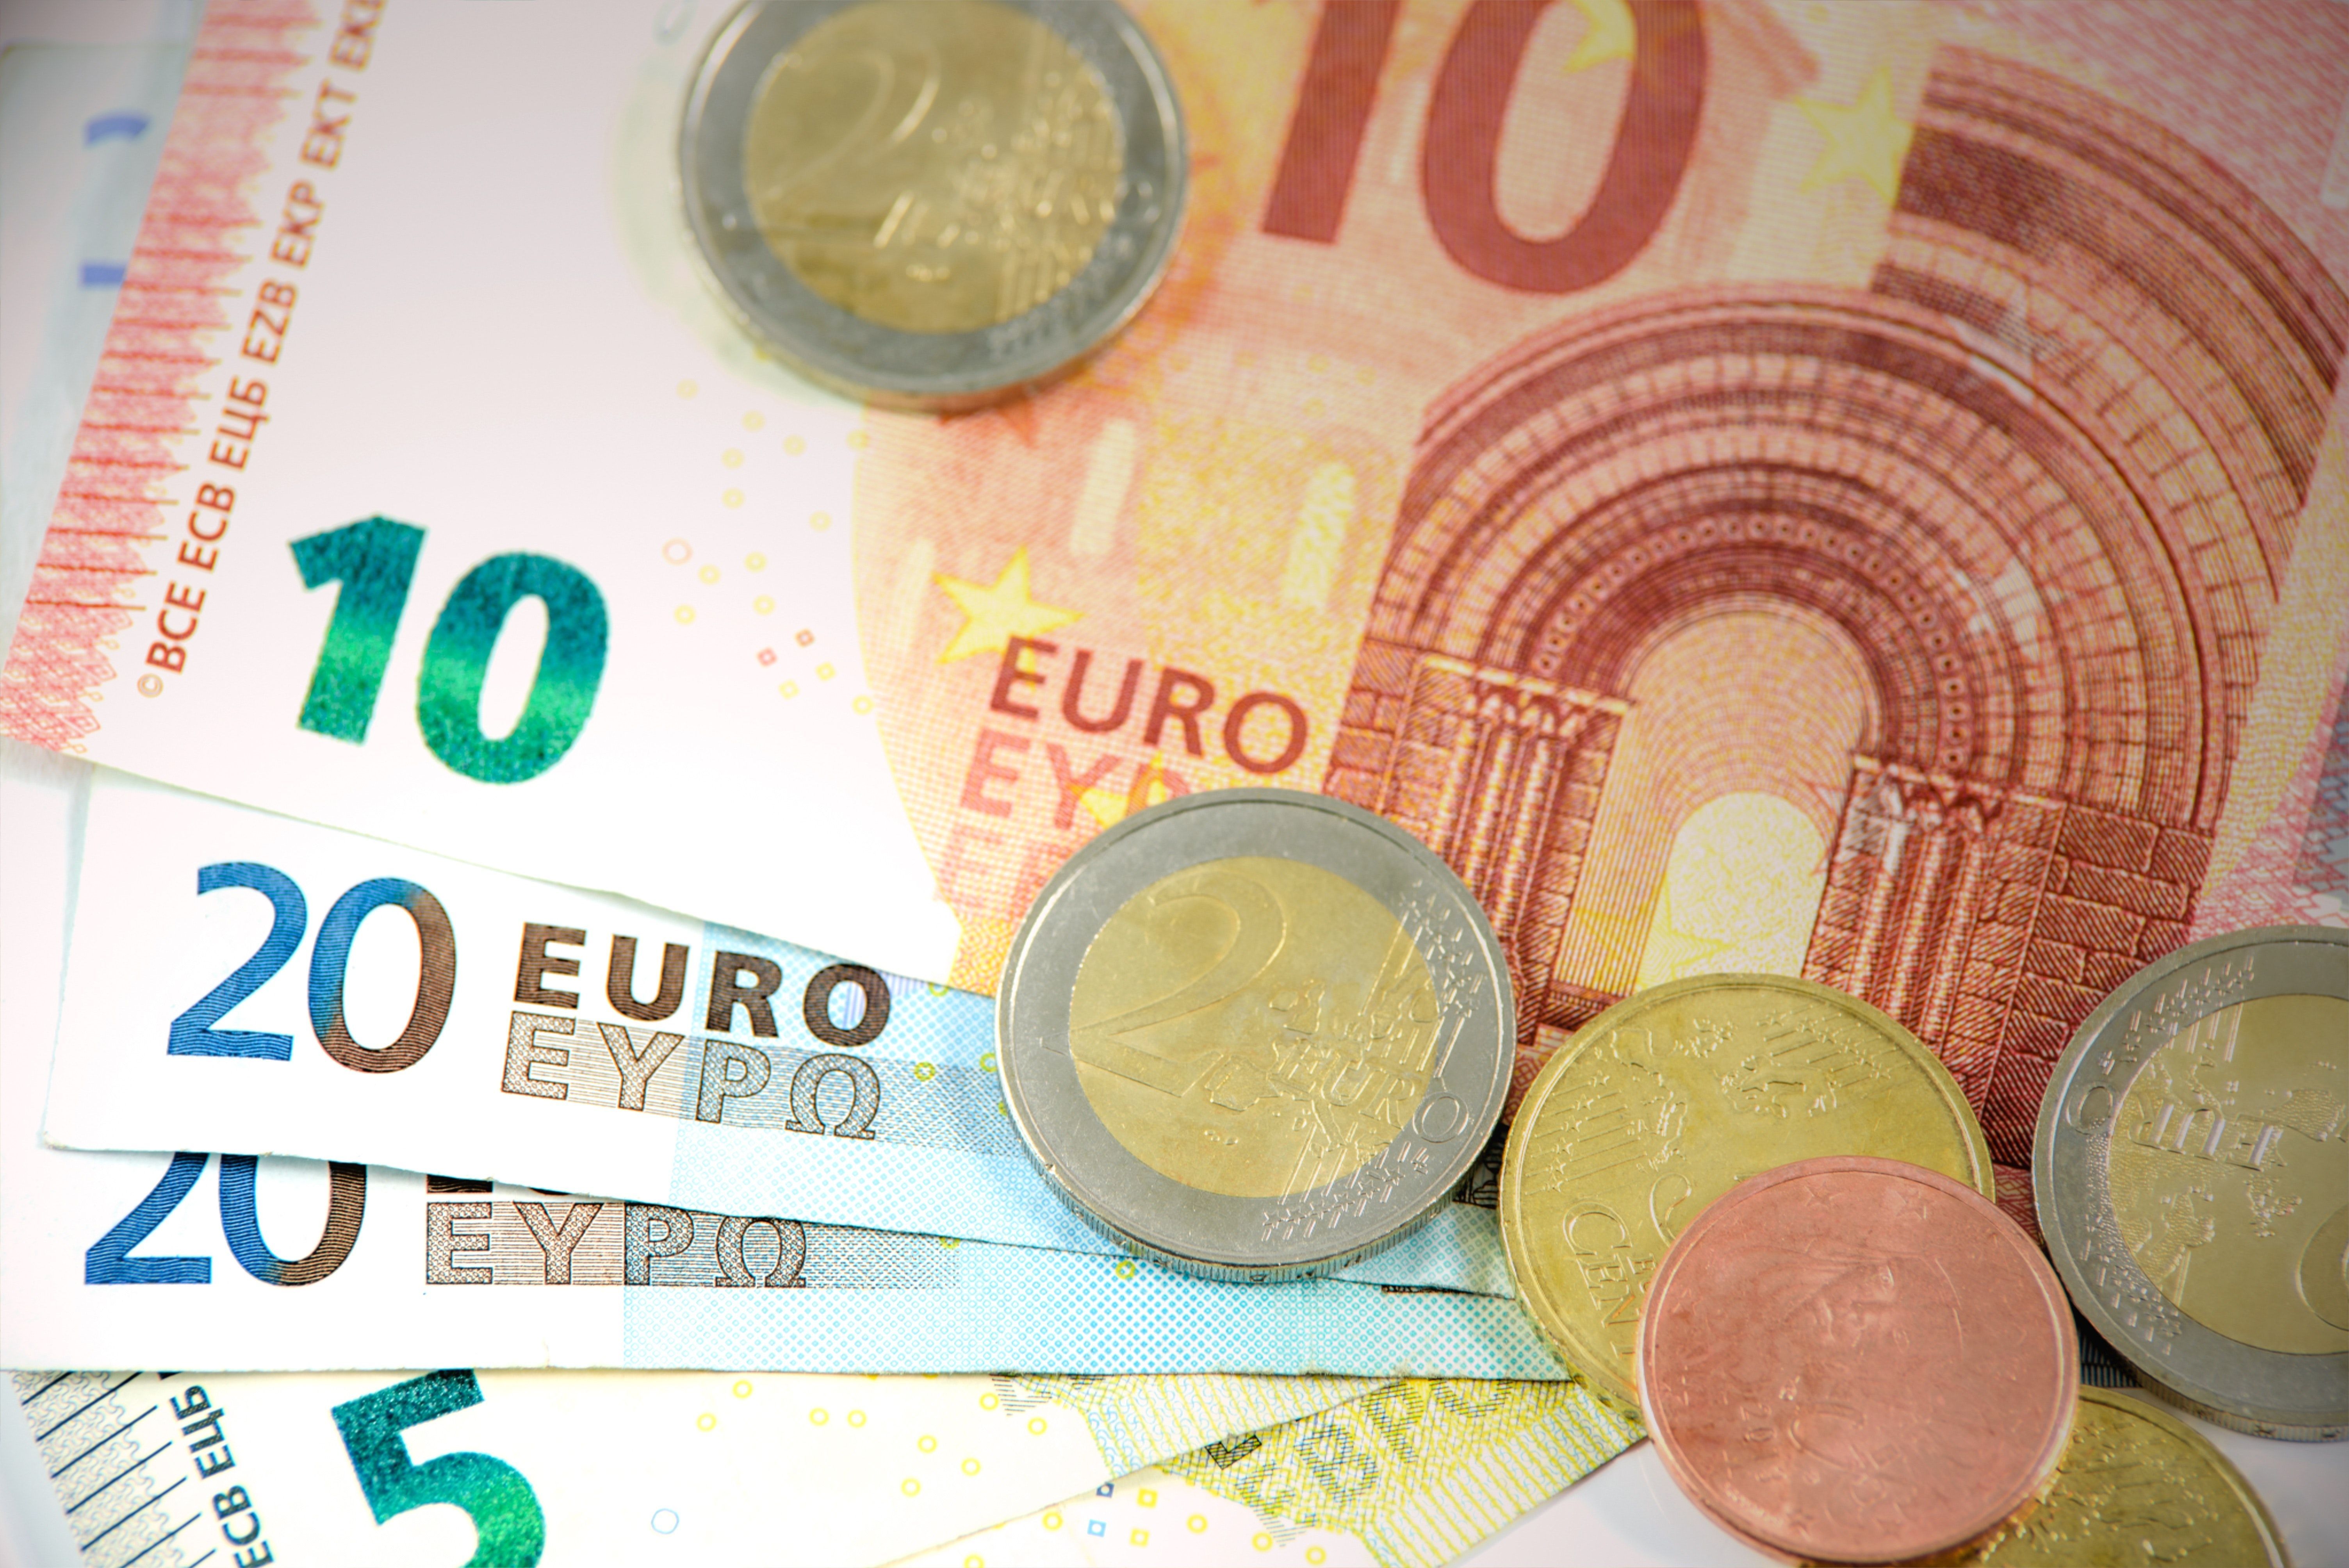 Euro today and Euro blue today: how much it closed at this Tuesday, February 27